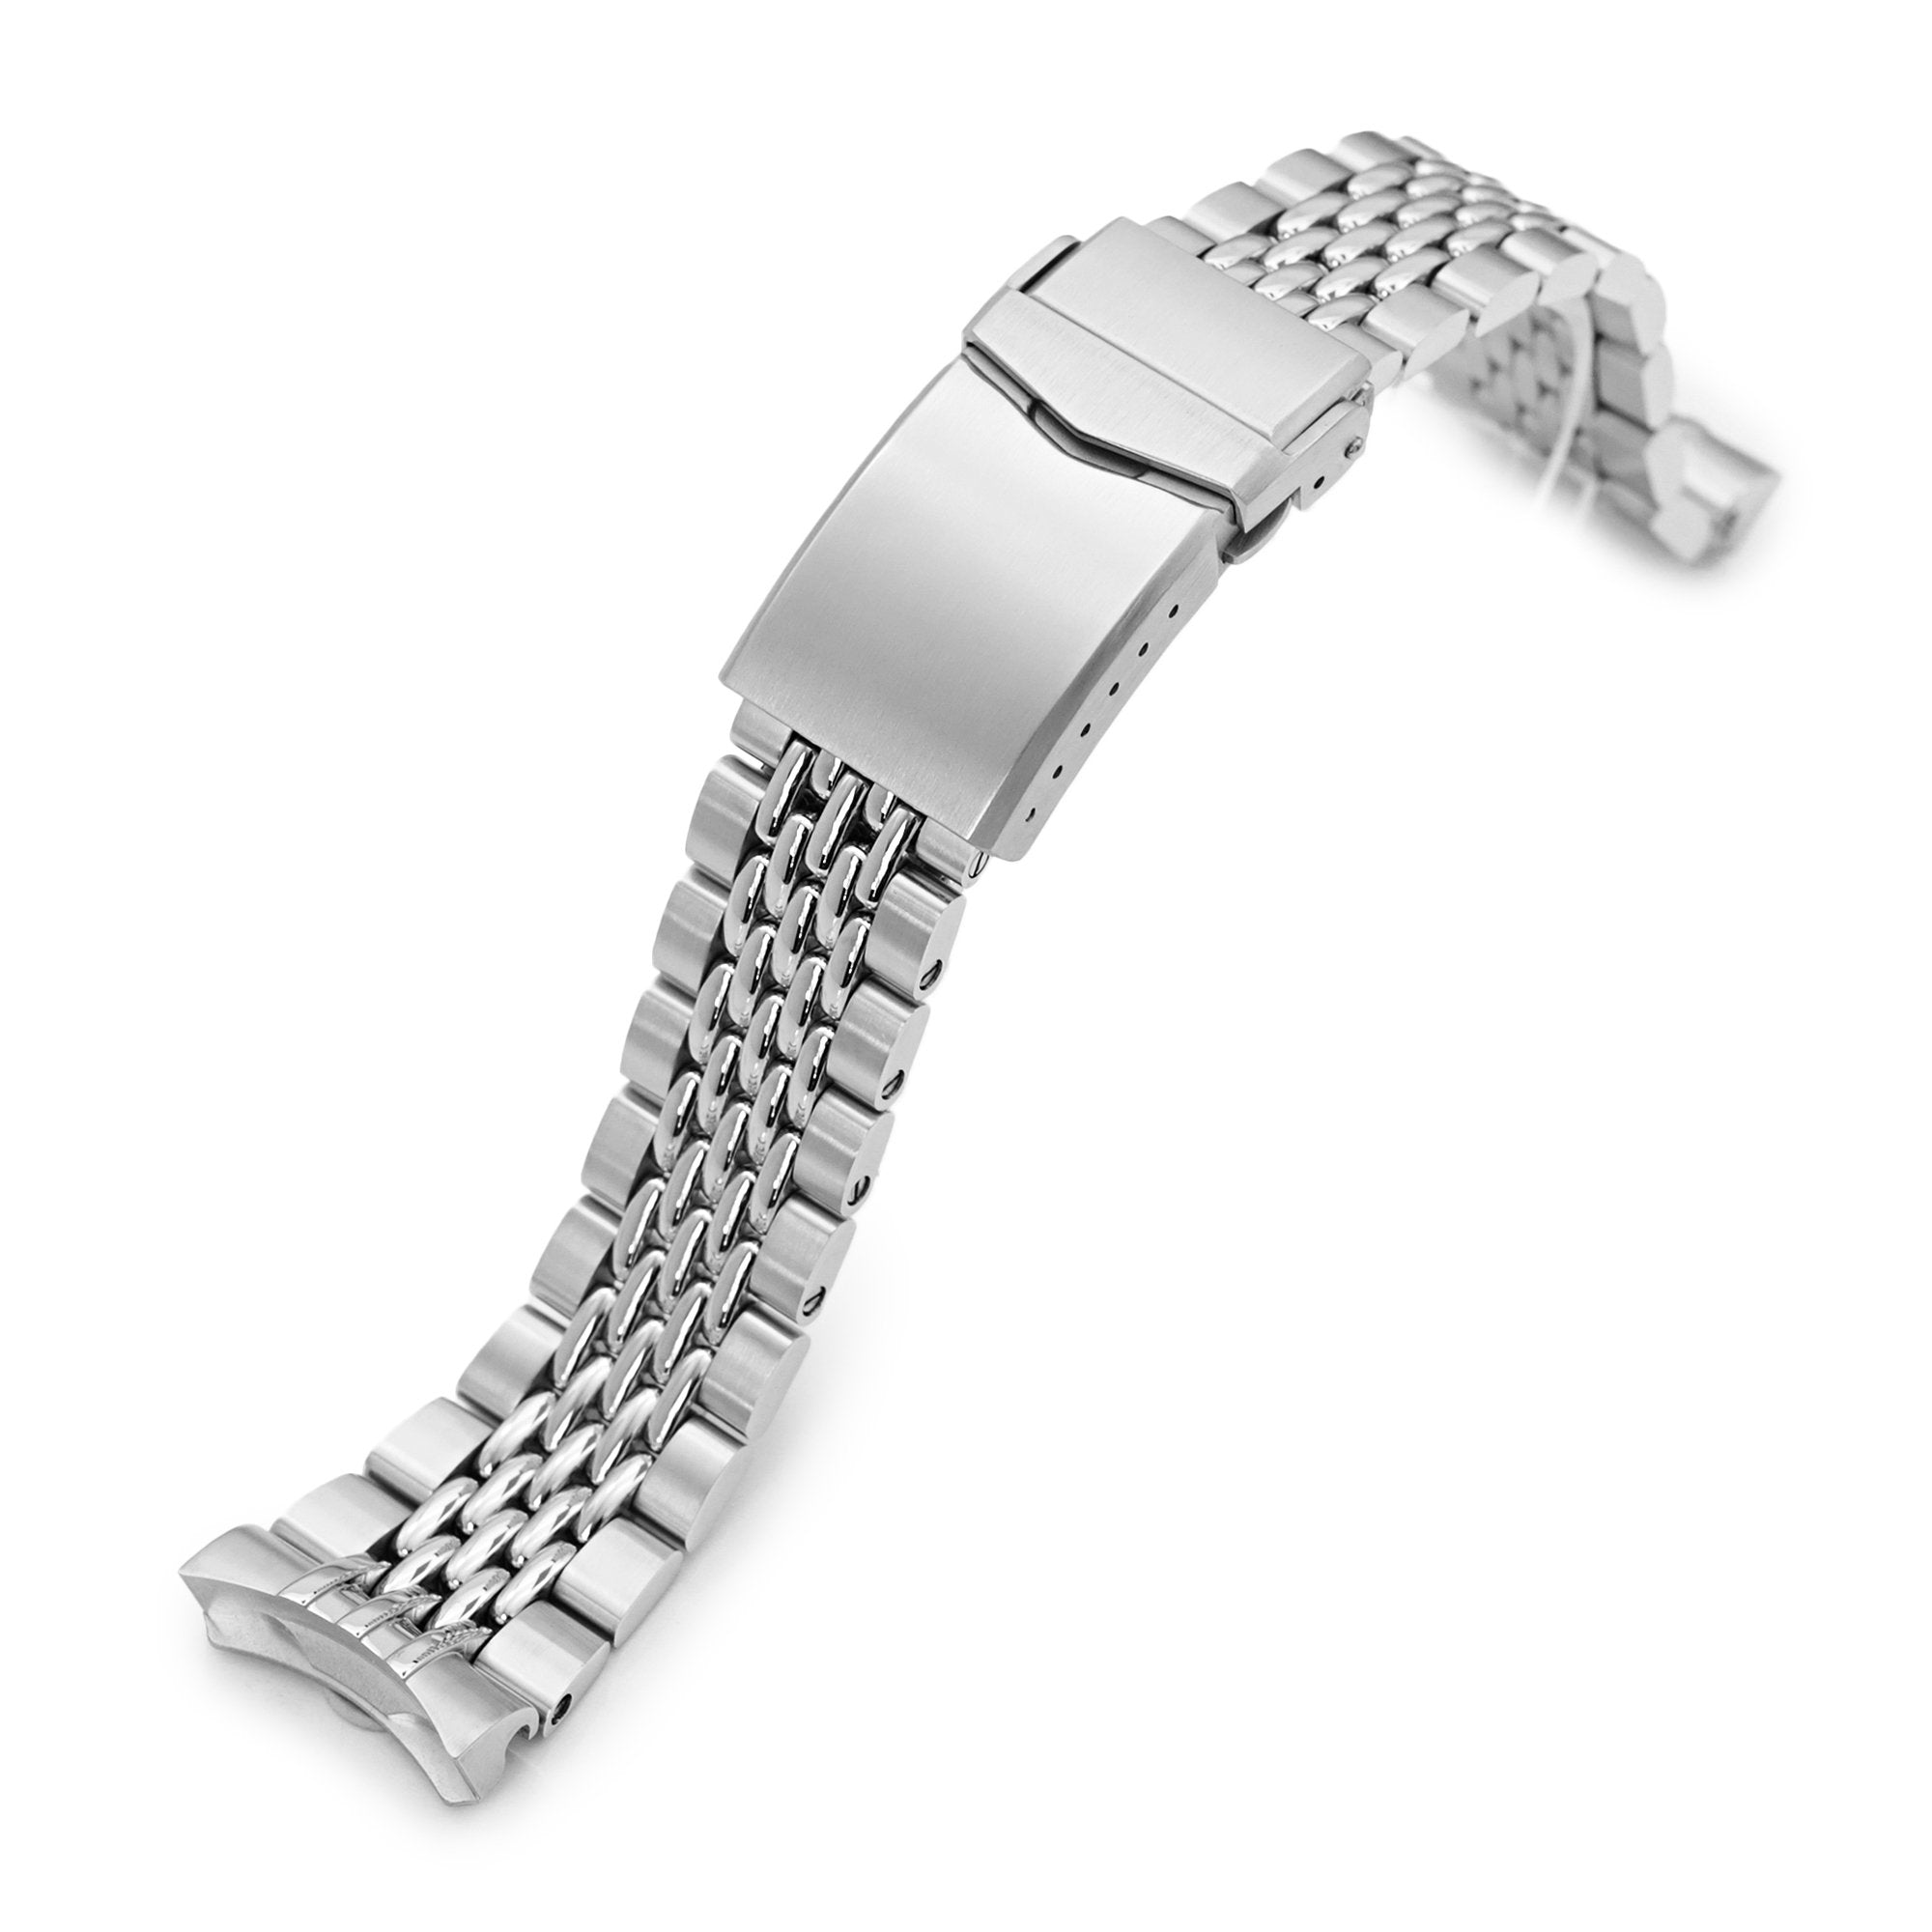 22mm Goma BOR Watch Band for Seiko SKX007, 316L Stainless Steel Brushed and Polished V-Clasp Strapcode Watch Bands